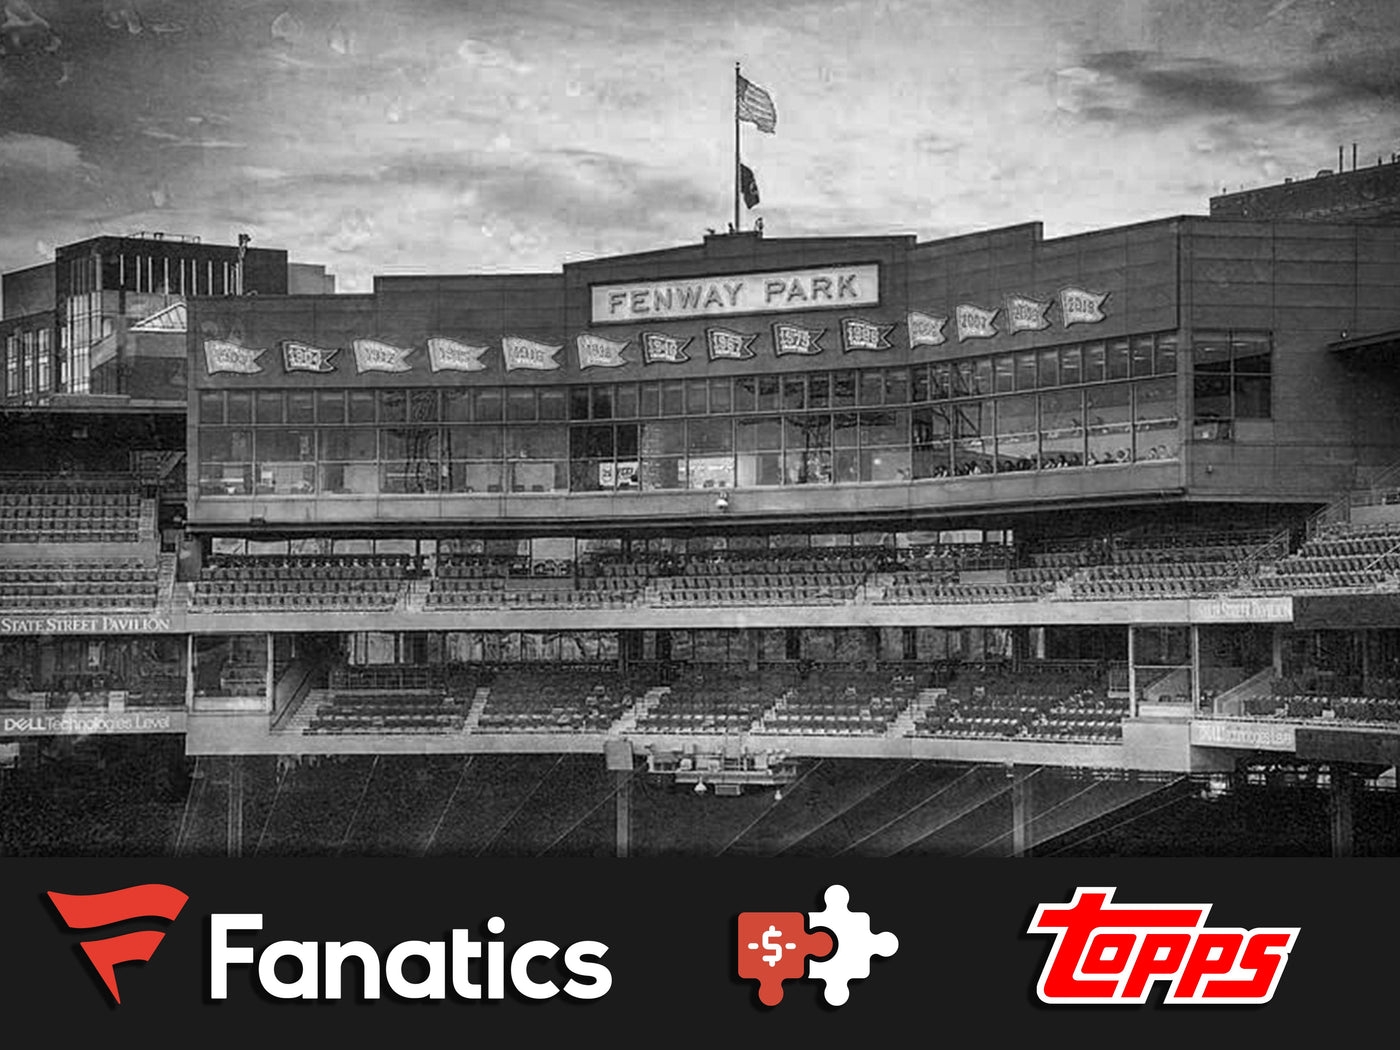 Grayscale image of a Fenway Park the Fanatics and Topps logos displayed underneath it